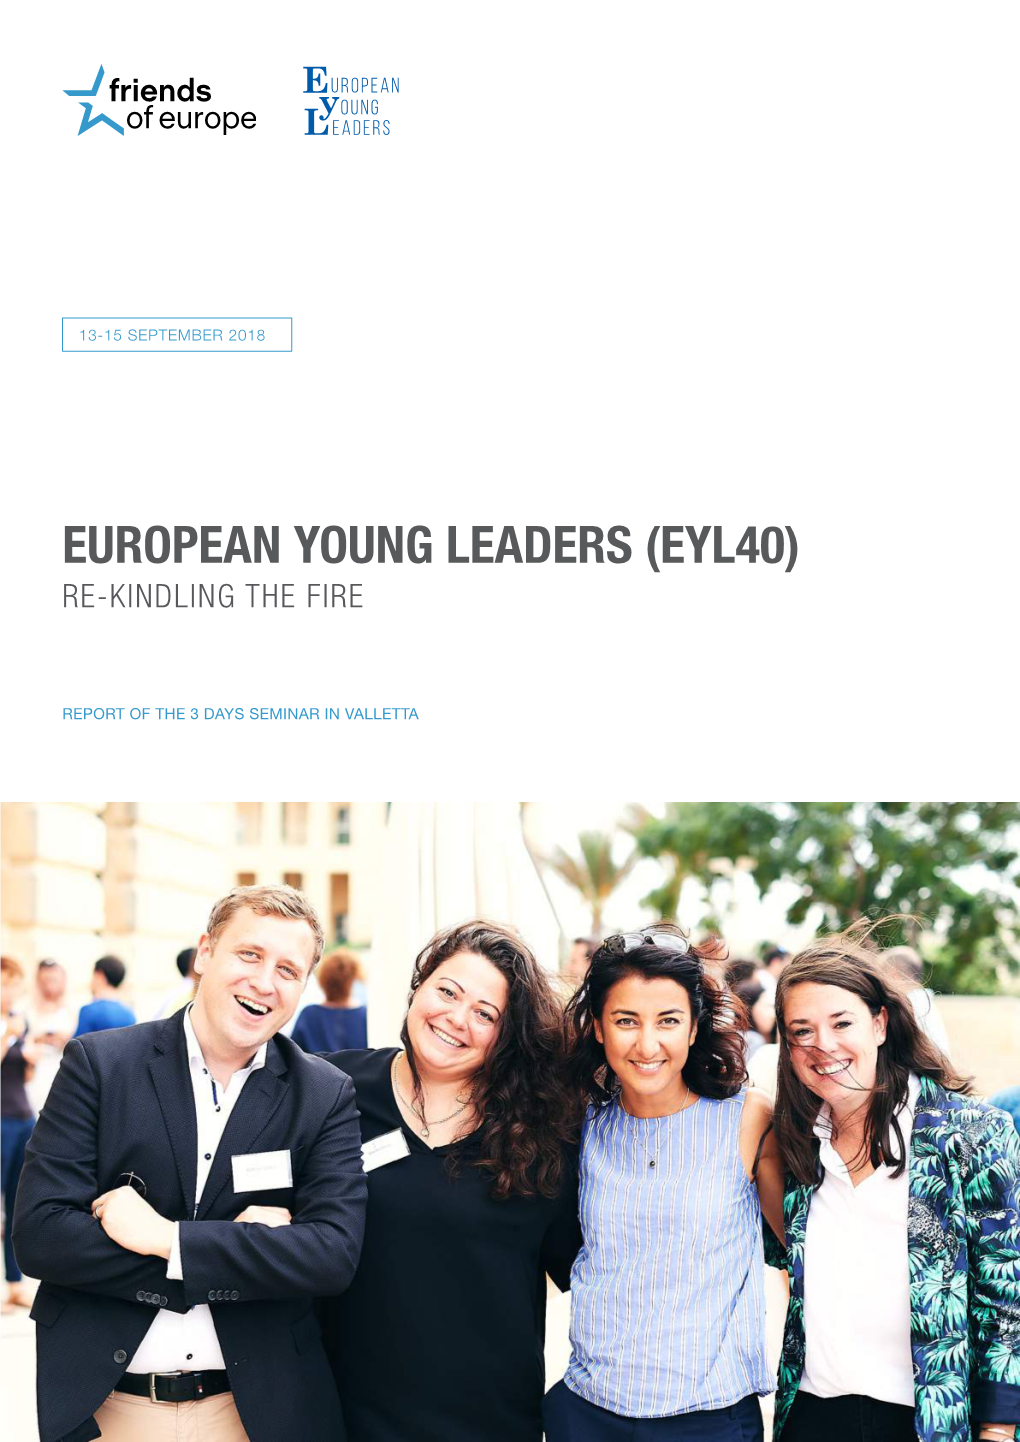 European Young Leaders (Eyl40) Re-Kindling the Fire